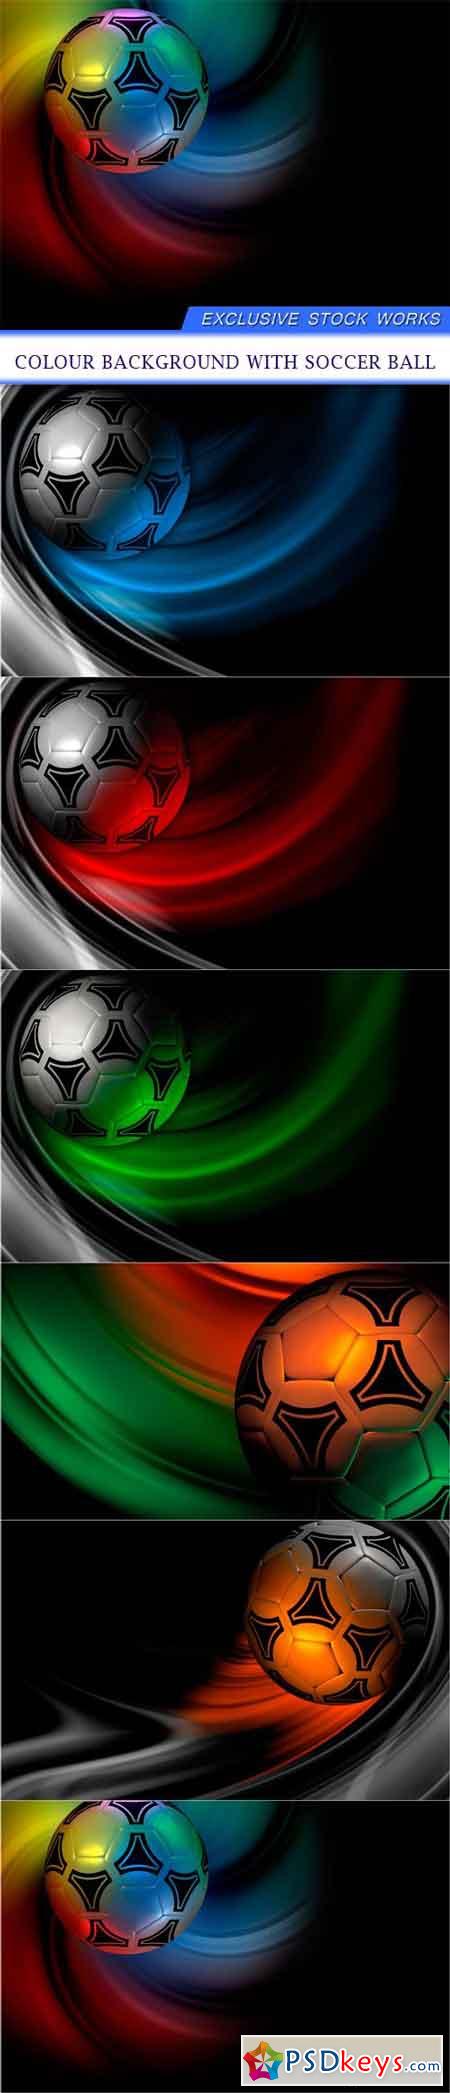 Colour background with soccer ball 6X JPEG